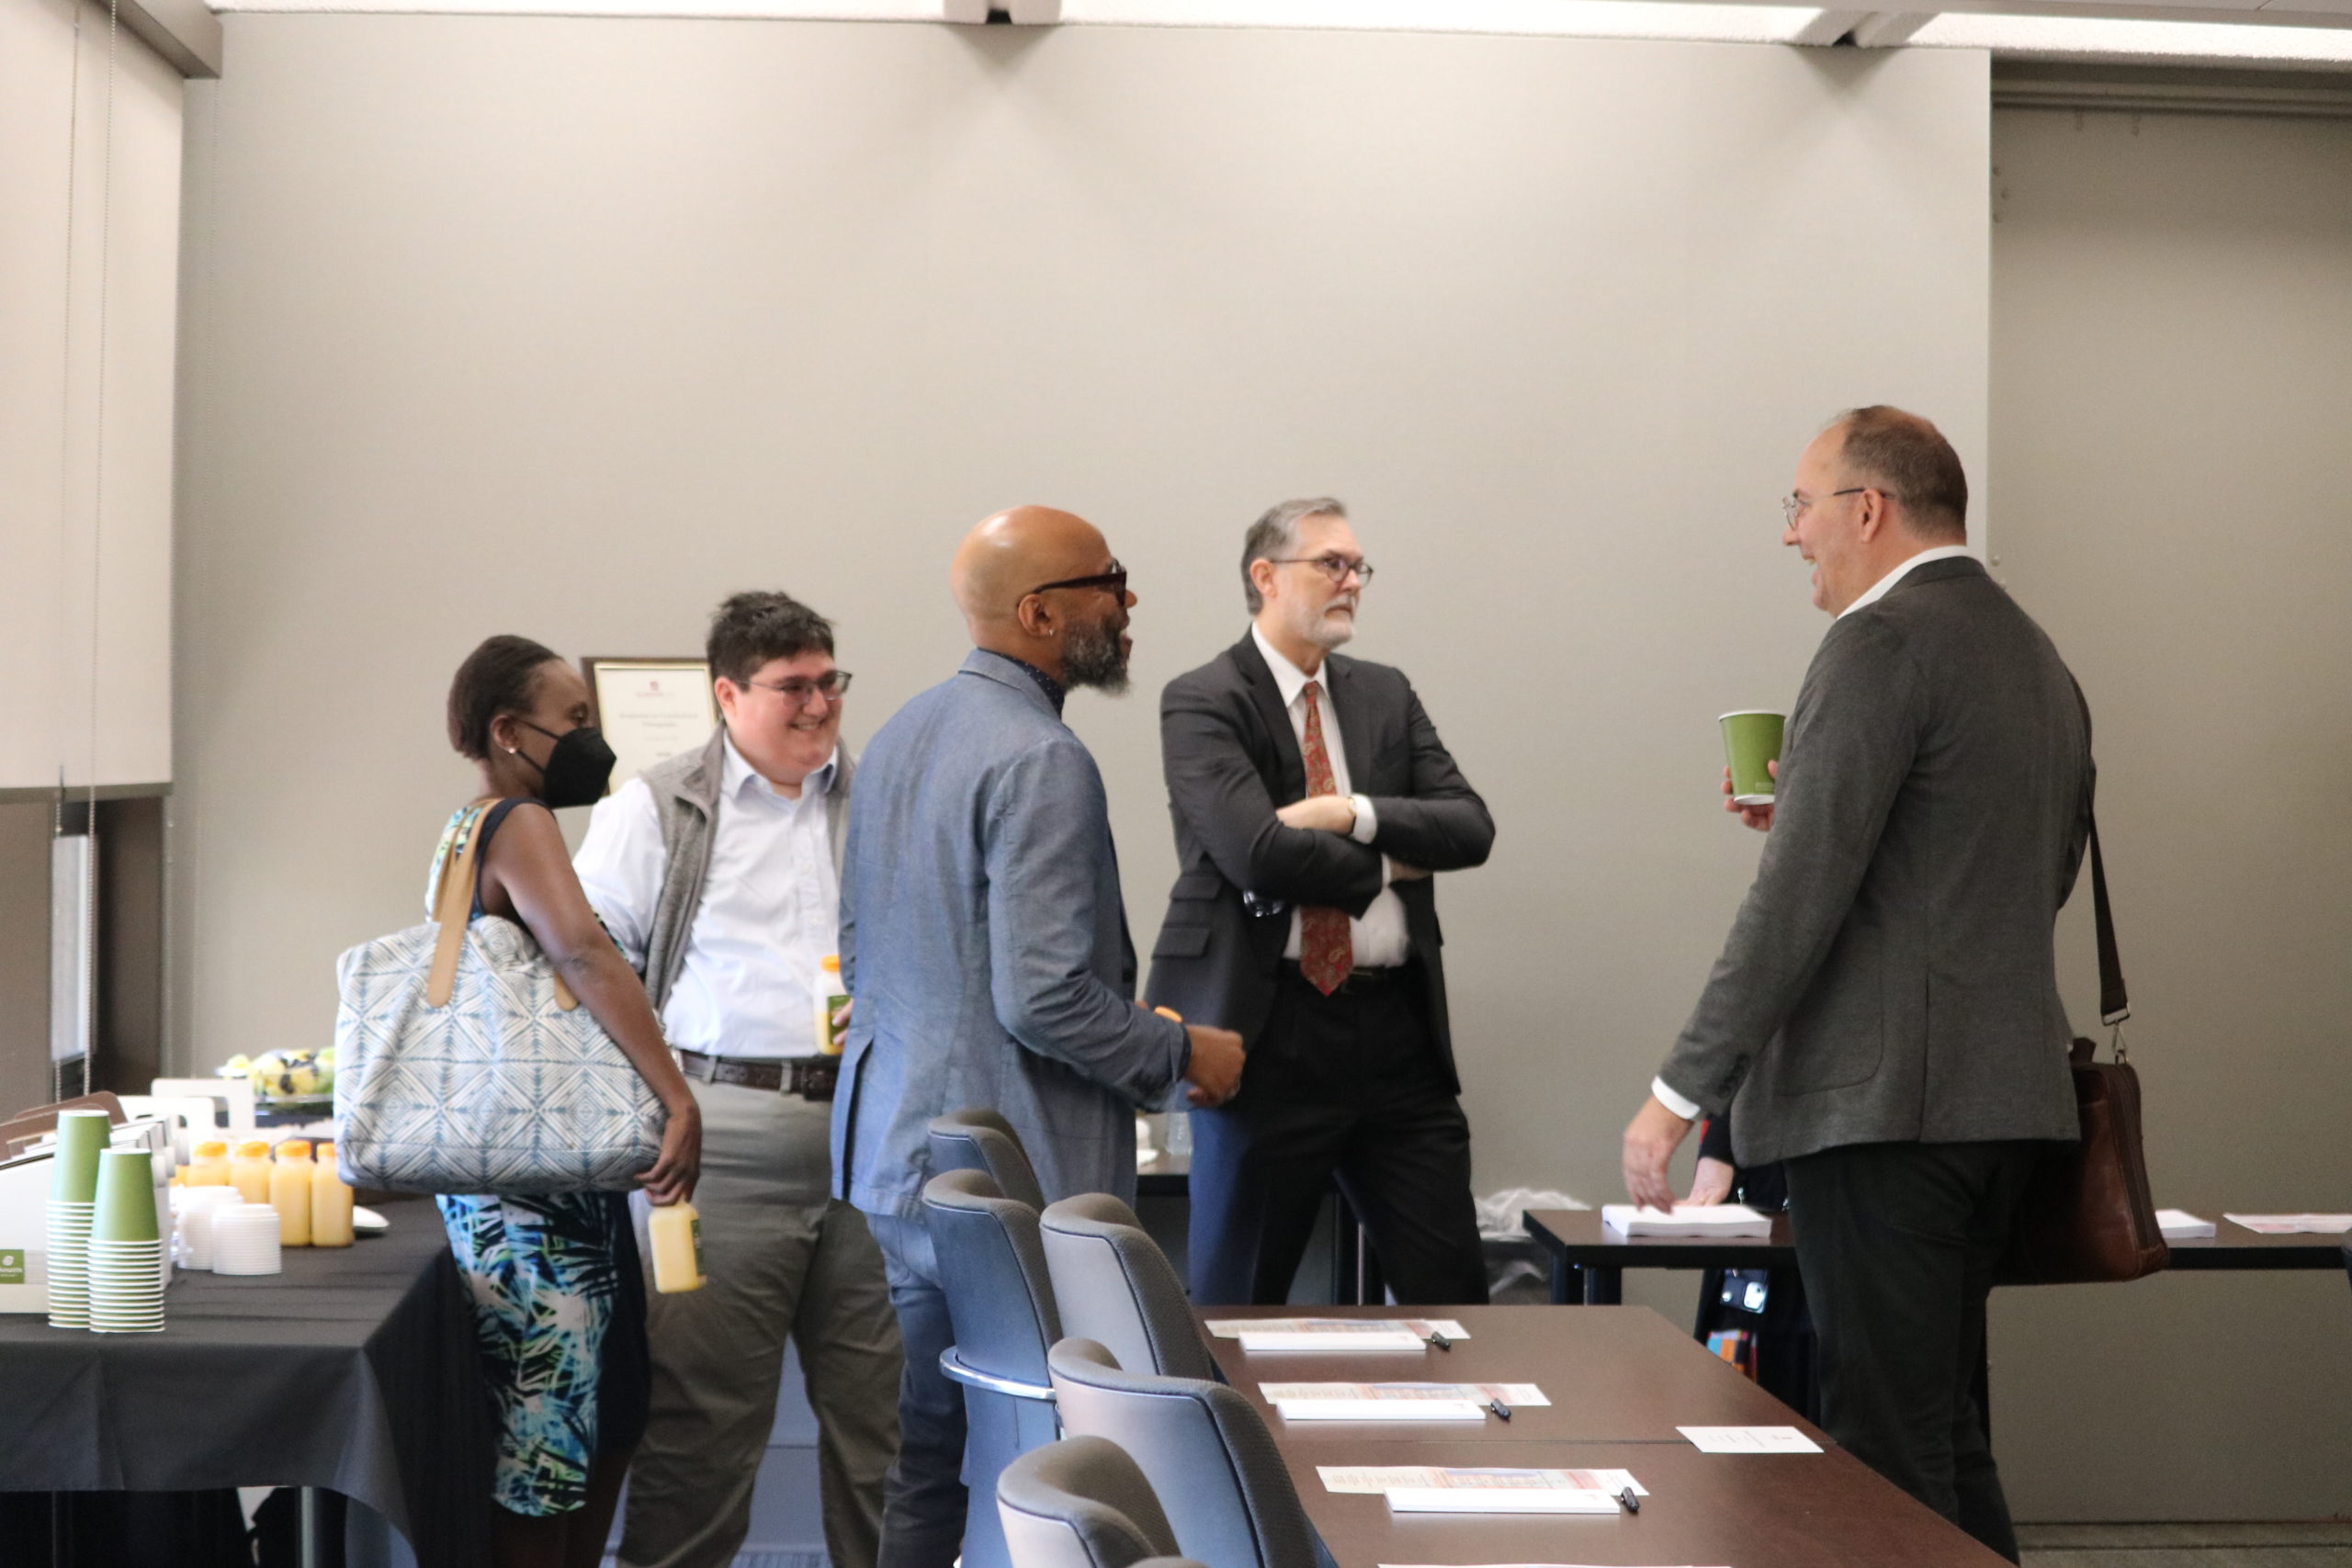 Scholars gather at the Constitutional Ethnography Symposium at the University of Alabama School of Law